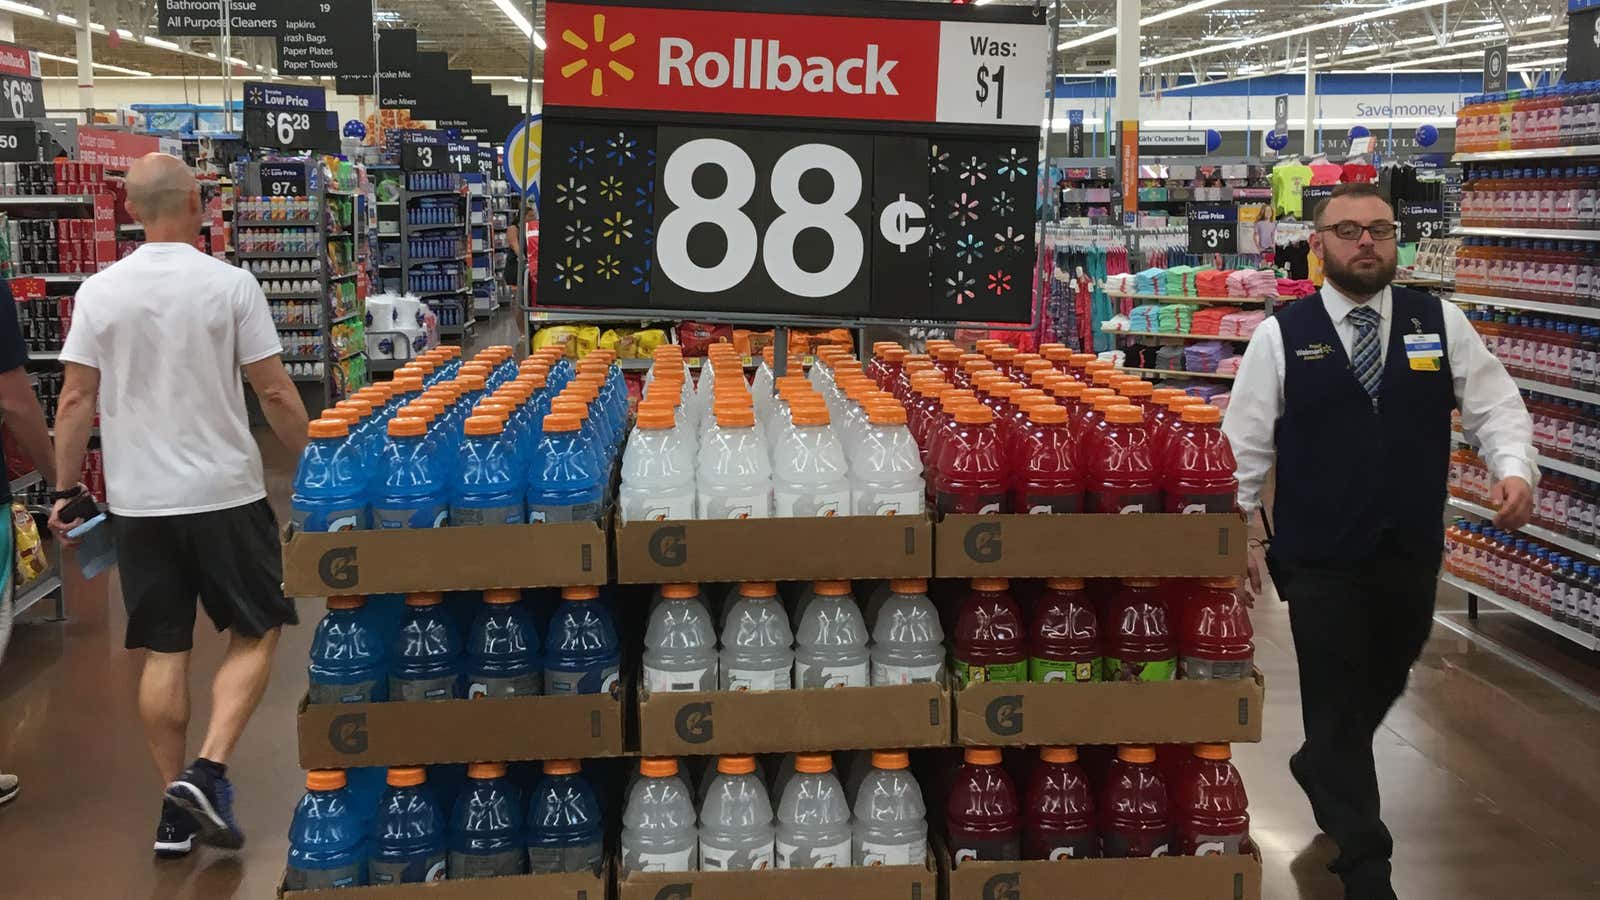 Walmart is making noticeable changes in every store for morning